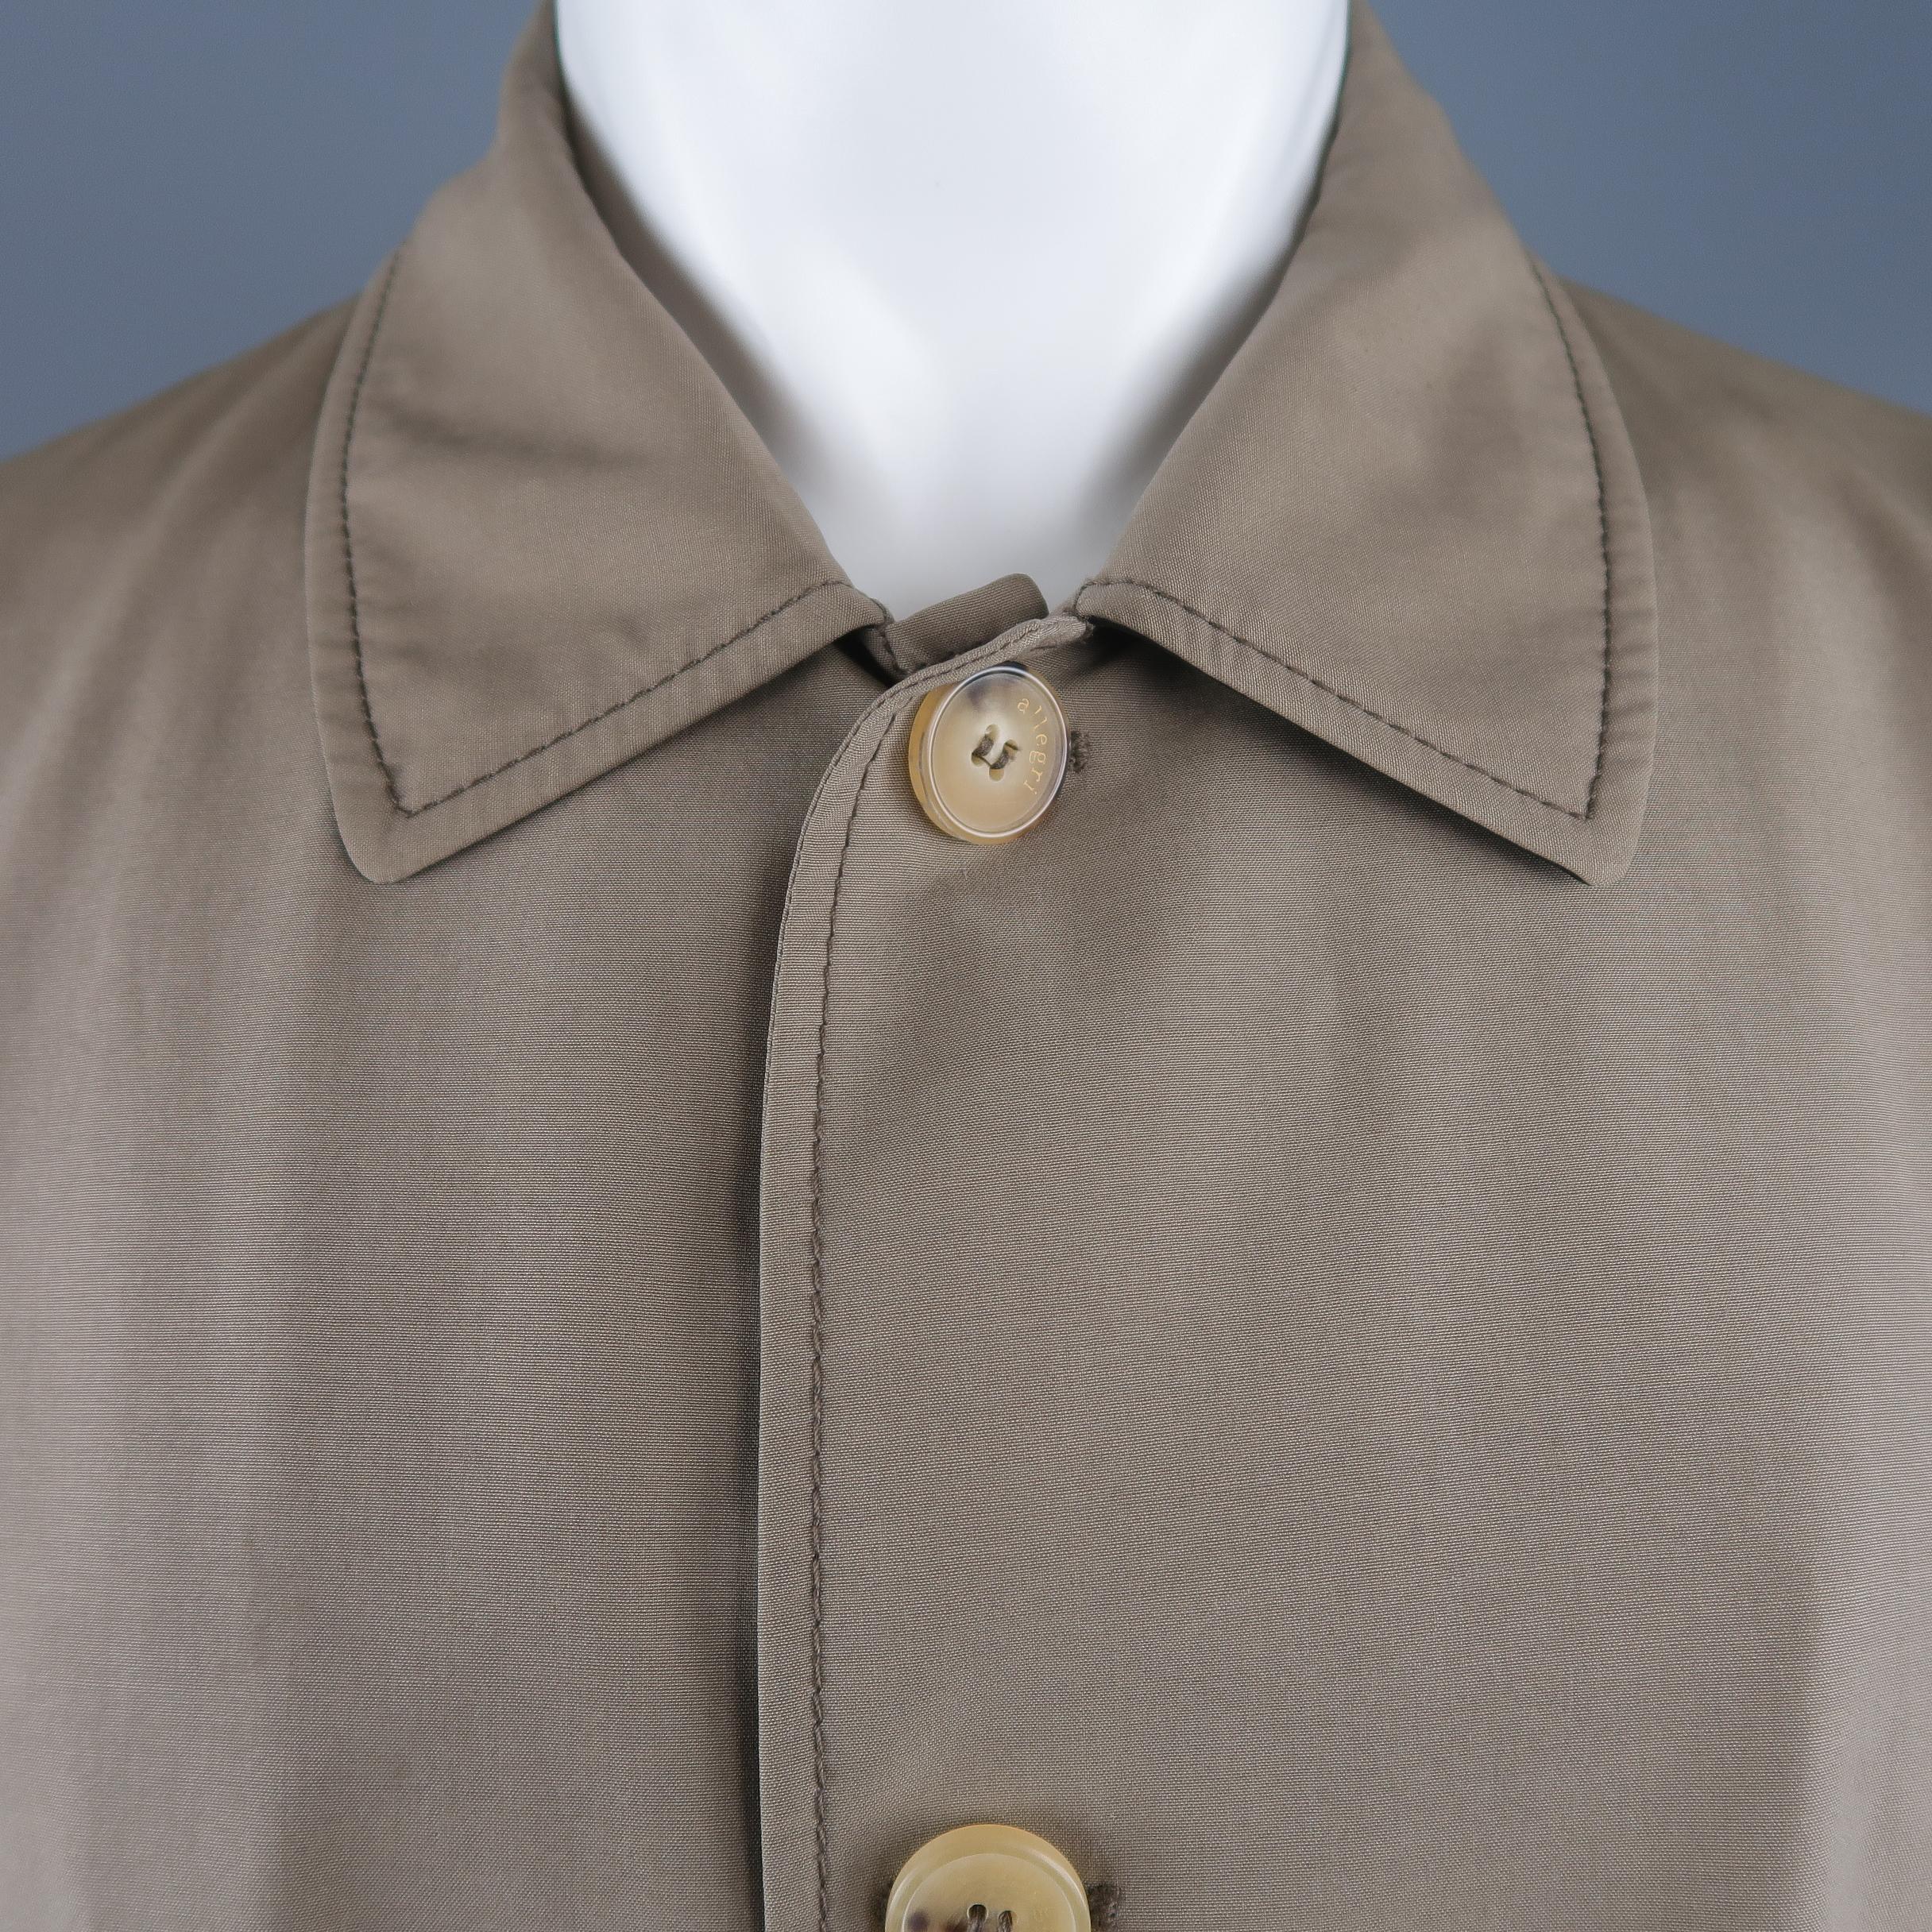 ALLEGRI car coat comes in dark khaki wool blend fabric with a pointed collar, button up front, tab cuffs, and zip pockets. Stain on chest. As-is.  Made in Italy.
 
Good Pre-Owned Condition.
Marked: IT 50
 
Measurements:
 
Shoulder: 19 in.
Chest: 46